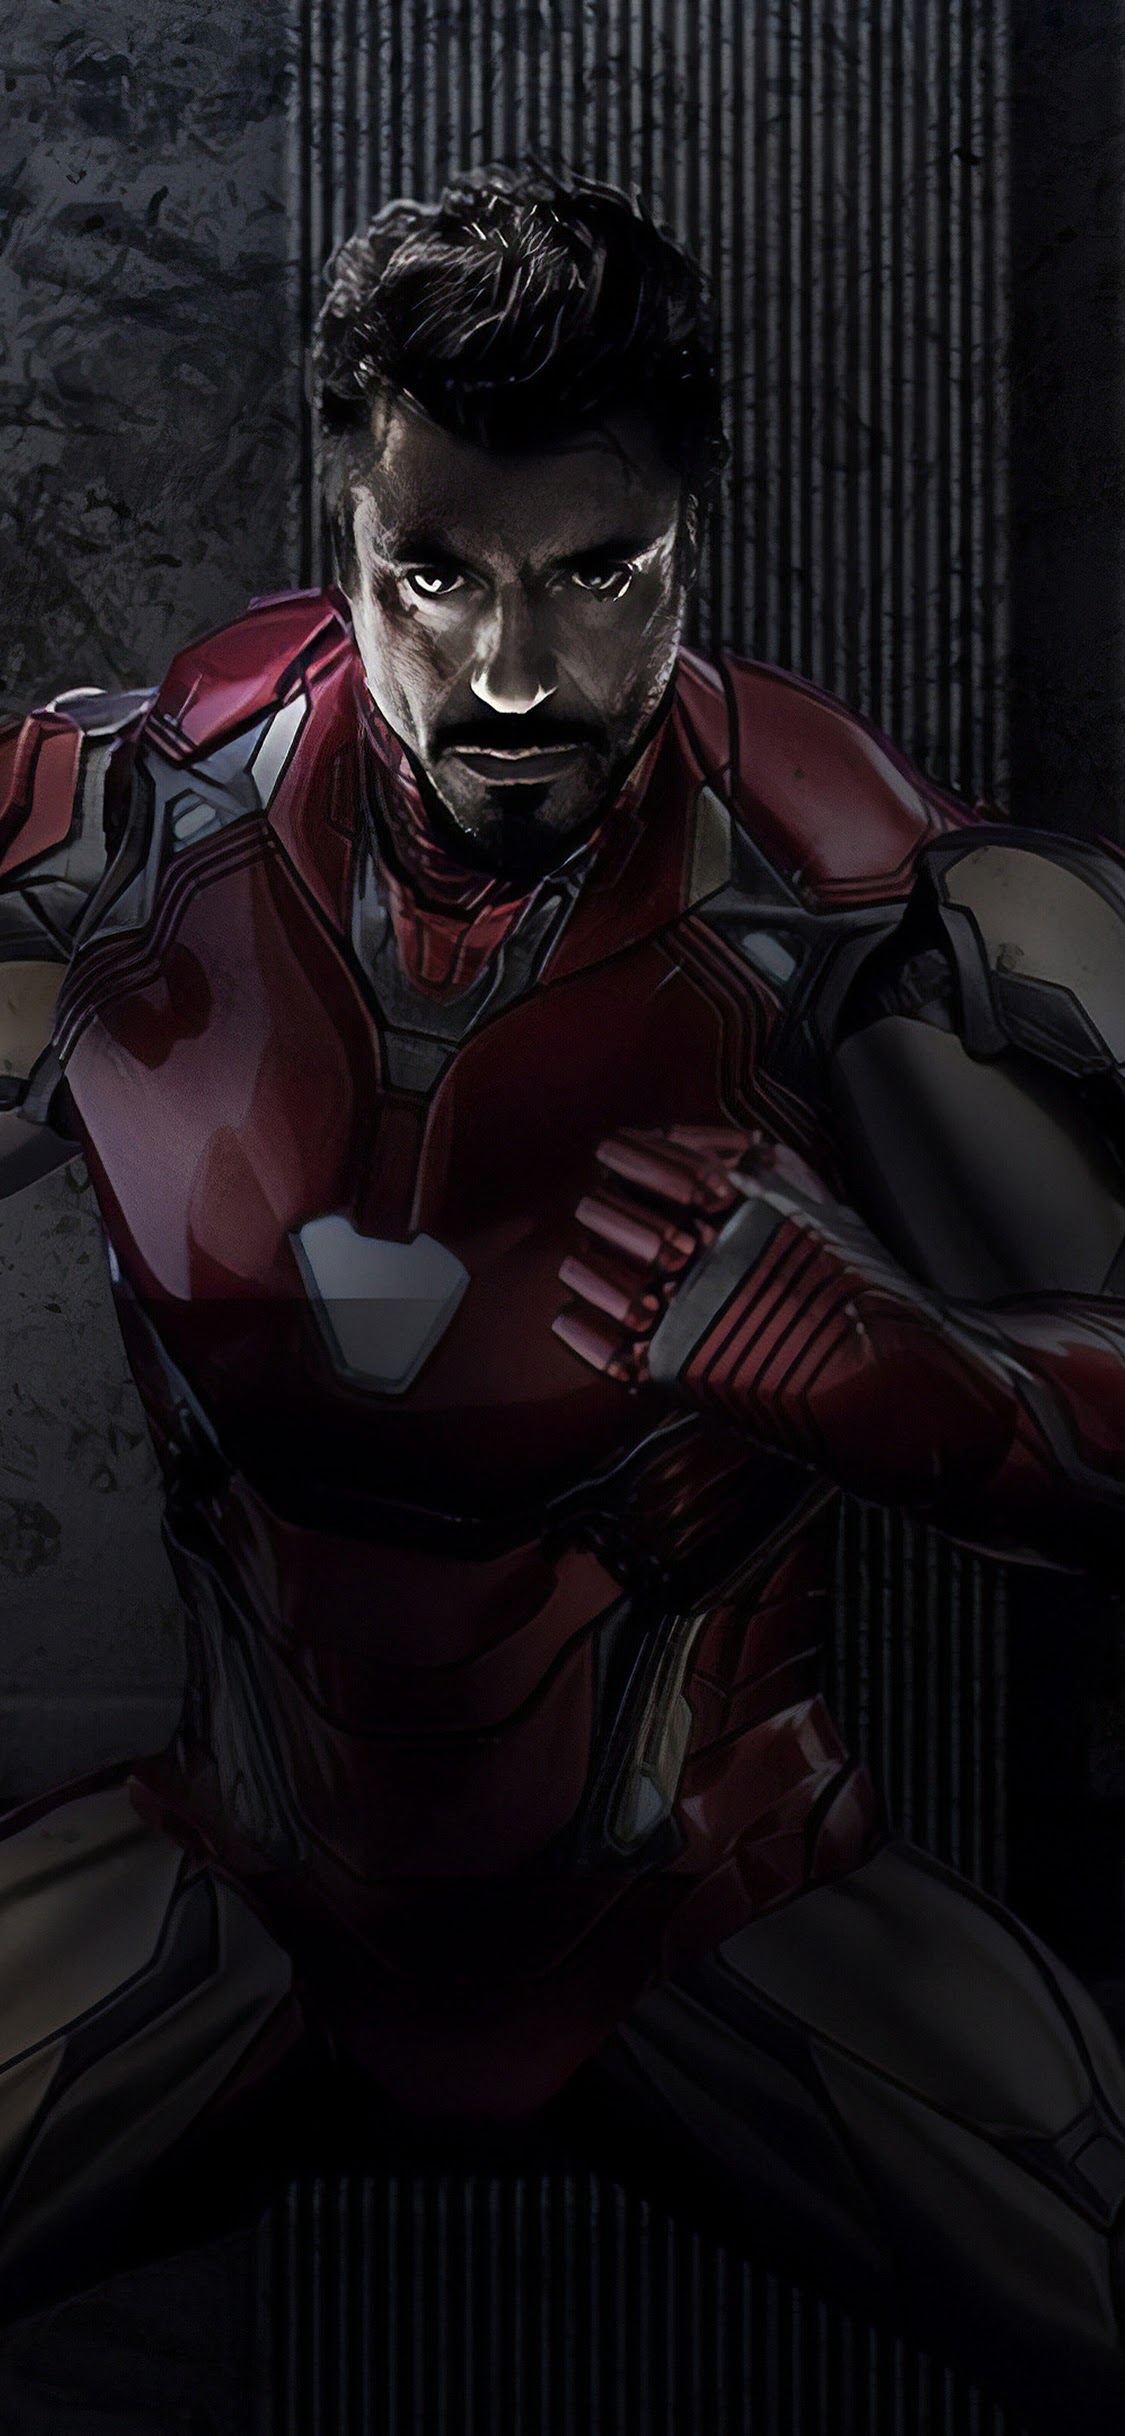 Featured image of post Iphone Tony Stark Wallpaper 4K Apple iphone 4 16 tony stark wallpapers fitting your device 640x960 or larger